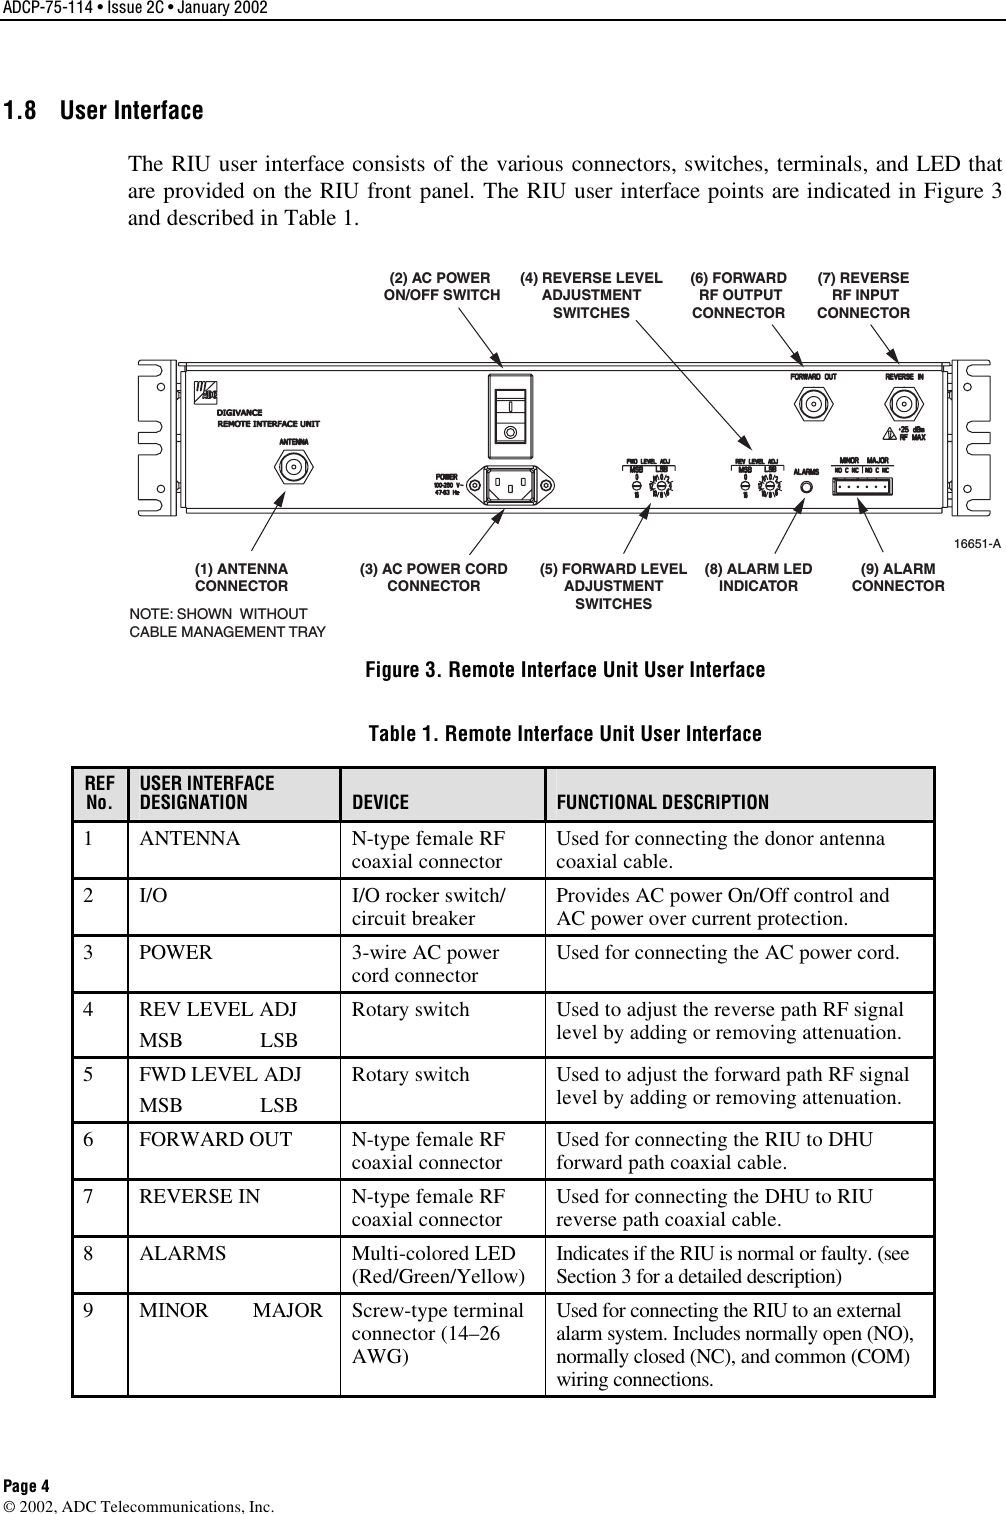 ADCP-75-114 • Issue 2C • January 2002 Page 4 ©2002, ADC Telecommunications, Inc.1.8 User Interface The RIU user interface consists of the various connectors, switches, terminals, and LED thatare provided on the RIU front panel. The RIU user interface points are indicated in Figure 3and described in Table 1.NOTE: SHOWN  WITHOUTCABLE MANAGEMENT TRAY(3) AC POWER CORDCONNECTOR(8) ALARM LEDINDICATOR(9) ALARMCONNECTOR(1) ANTENNACONNECTOR(5) FORWARD LEVELADJUSTMENTSWITCHES(2) AC POWER ON/OFF SWITCH(6) FORWARD RF OUTPUTCONNECTOR(7) REVERSE RF INPUTCONNECTOR(4) REVERSE LEVELADJUSTMENTSWITCHES16651-AFigure 3. Remote Interface Unit User Interface Table 1. Remote Interface Unit User Interface REFNo. USER INTERFACE DESIGNATION  DEVICE  FUNCTIONAL DESCRIPTION 1ANTENNA N-type female RFcoaxial connector Used for connecting the donor antennacoaxial cable.2I/O I/O rocker switch/circuit breaker Provides AC power On/Off control andAC power over current protection.3POWER 3-wire AC powercord connector Used for connecting the AC power cord.4REV LEVEL ADJMSB LSBRotary switch Used to adjust the reverse path RF signallevel by adding or removing attenuation.5FWD LEVEL ADJMSB LSBRotary switch Used to adjust the forward path RF signallevel by adding or removing attenuation.6FORWARD OUT N-type female RFcoaxial connector Used for connecting the RIU to DHUforward path coaxial cable.7REVERSE IN N-type female RFcoaxial connector Used for connecting the DHU to RIUreverse path coaxial cable.8ALARMS Multi-colored LED(Red/Green/Yellow) Indicates if the RIU is normal or faulty. (seeSection 3for adetailed description)9MINOR MAJOR Screw-type terminalconnector (14–26AWG)Used for connecting the RIU to an externalalarm system. Includes normally open (NO),normally closed (NC), and common (COM)wiring connections.